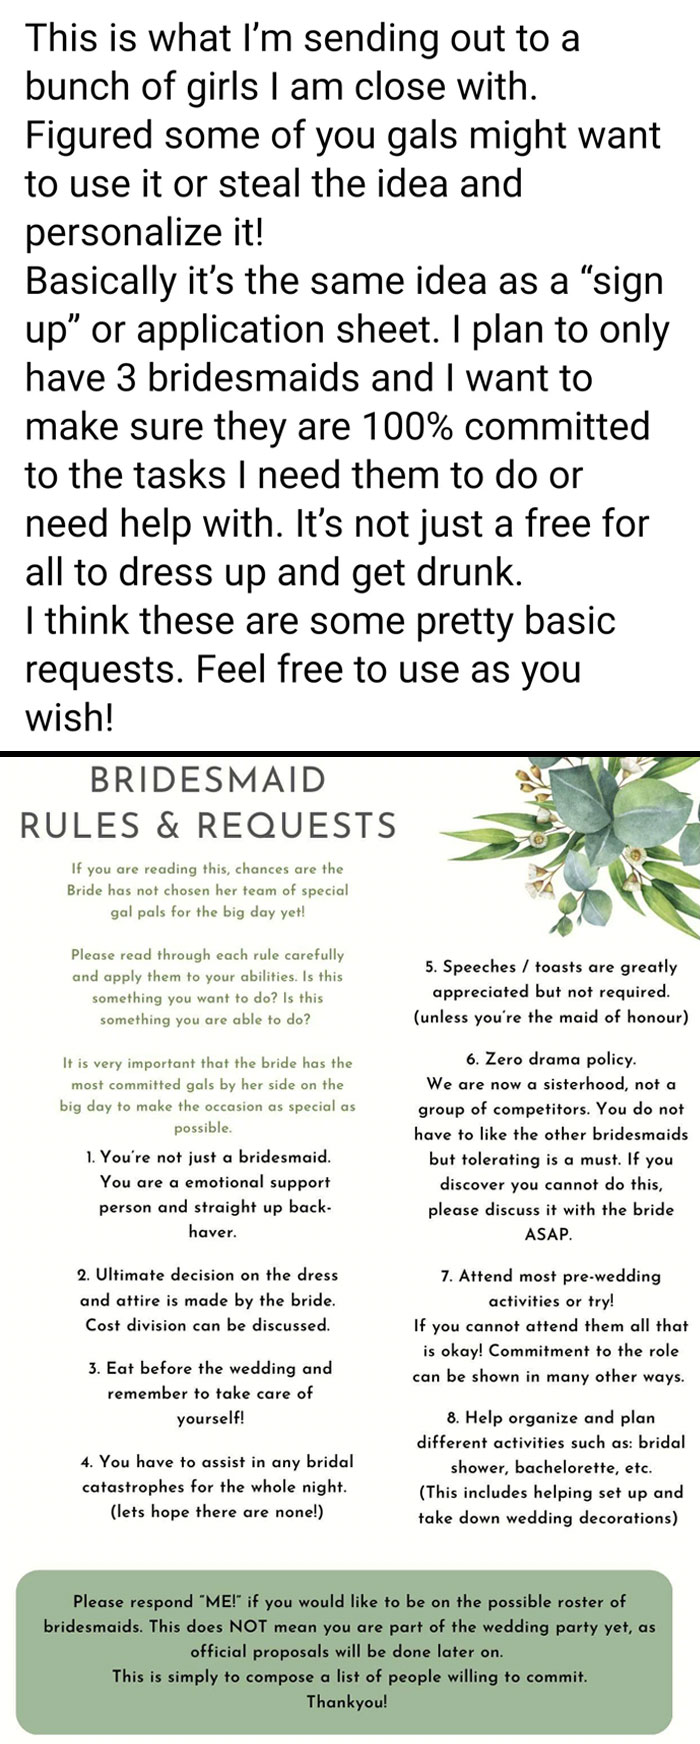 Bride Makes A List Of Rules For The Bridesmaids Who Have To "Apply" For The Role